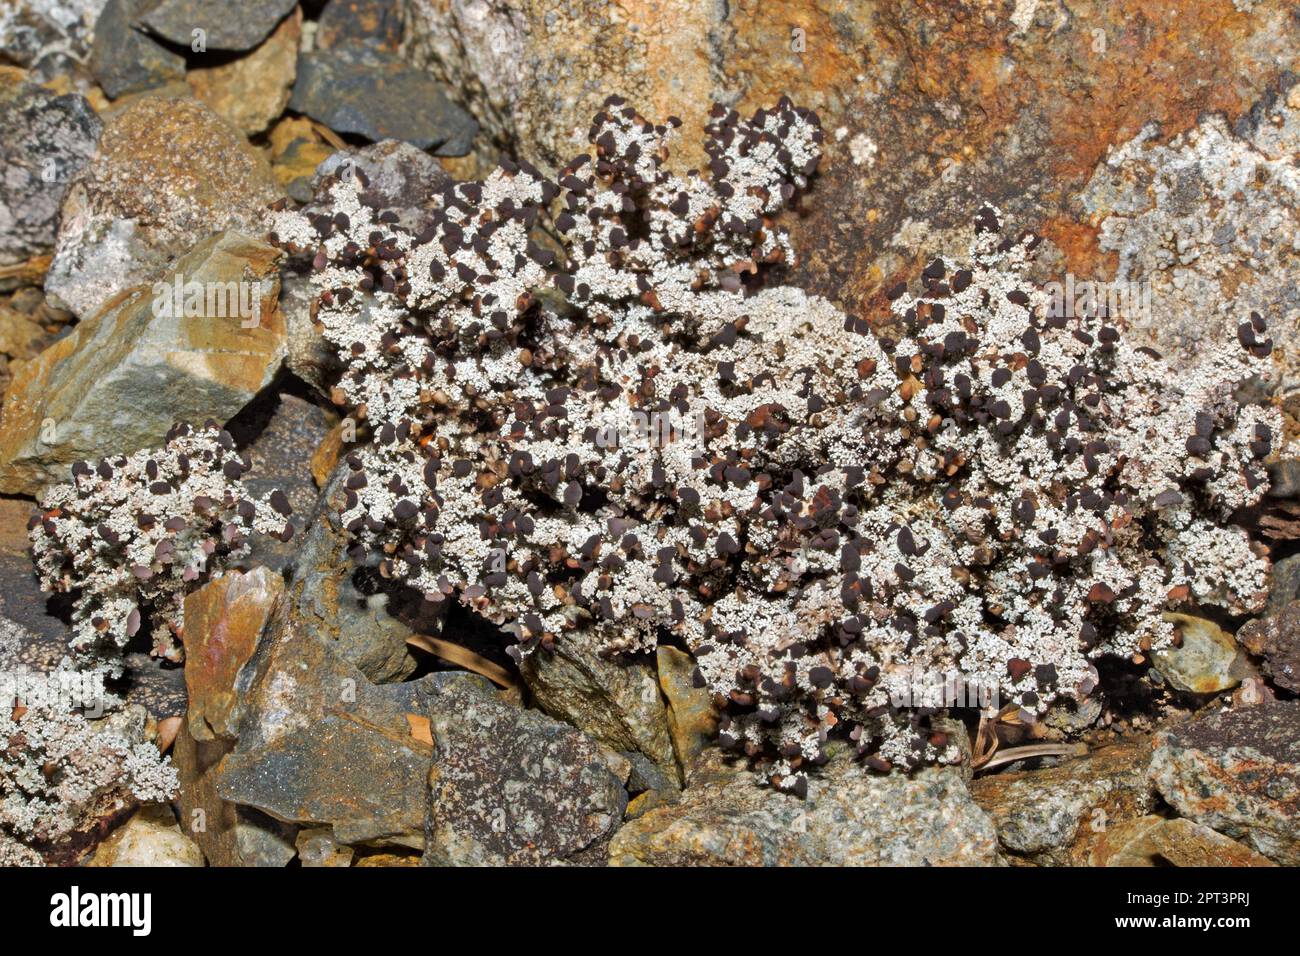 Stereocaulon vesuvianum is a fruticose lichen found on well-lit upland siliceous rocks. It can tolerate heavy metals and has a global distribution. Stock Photo